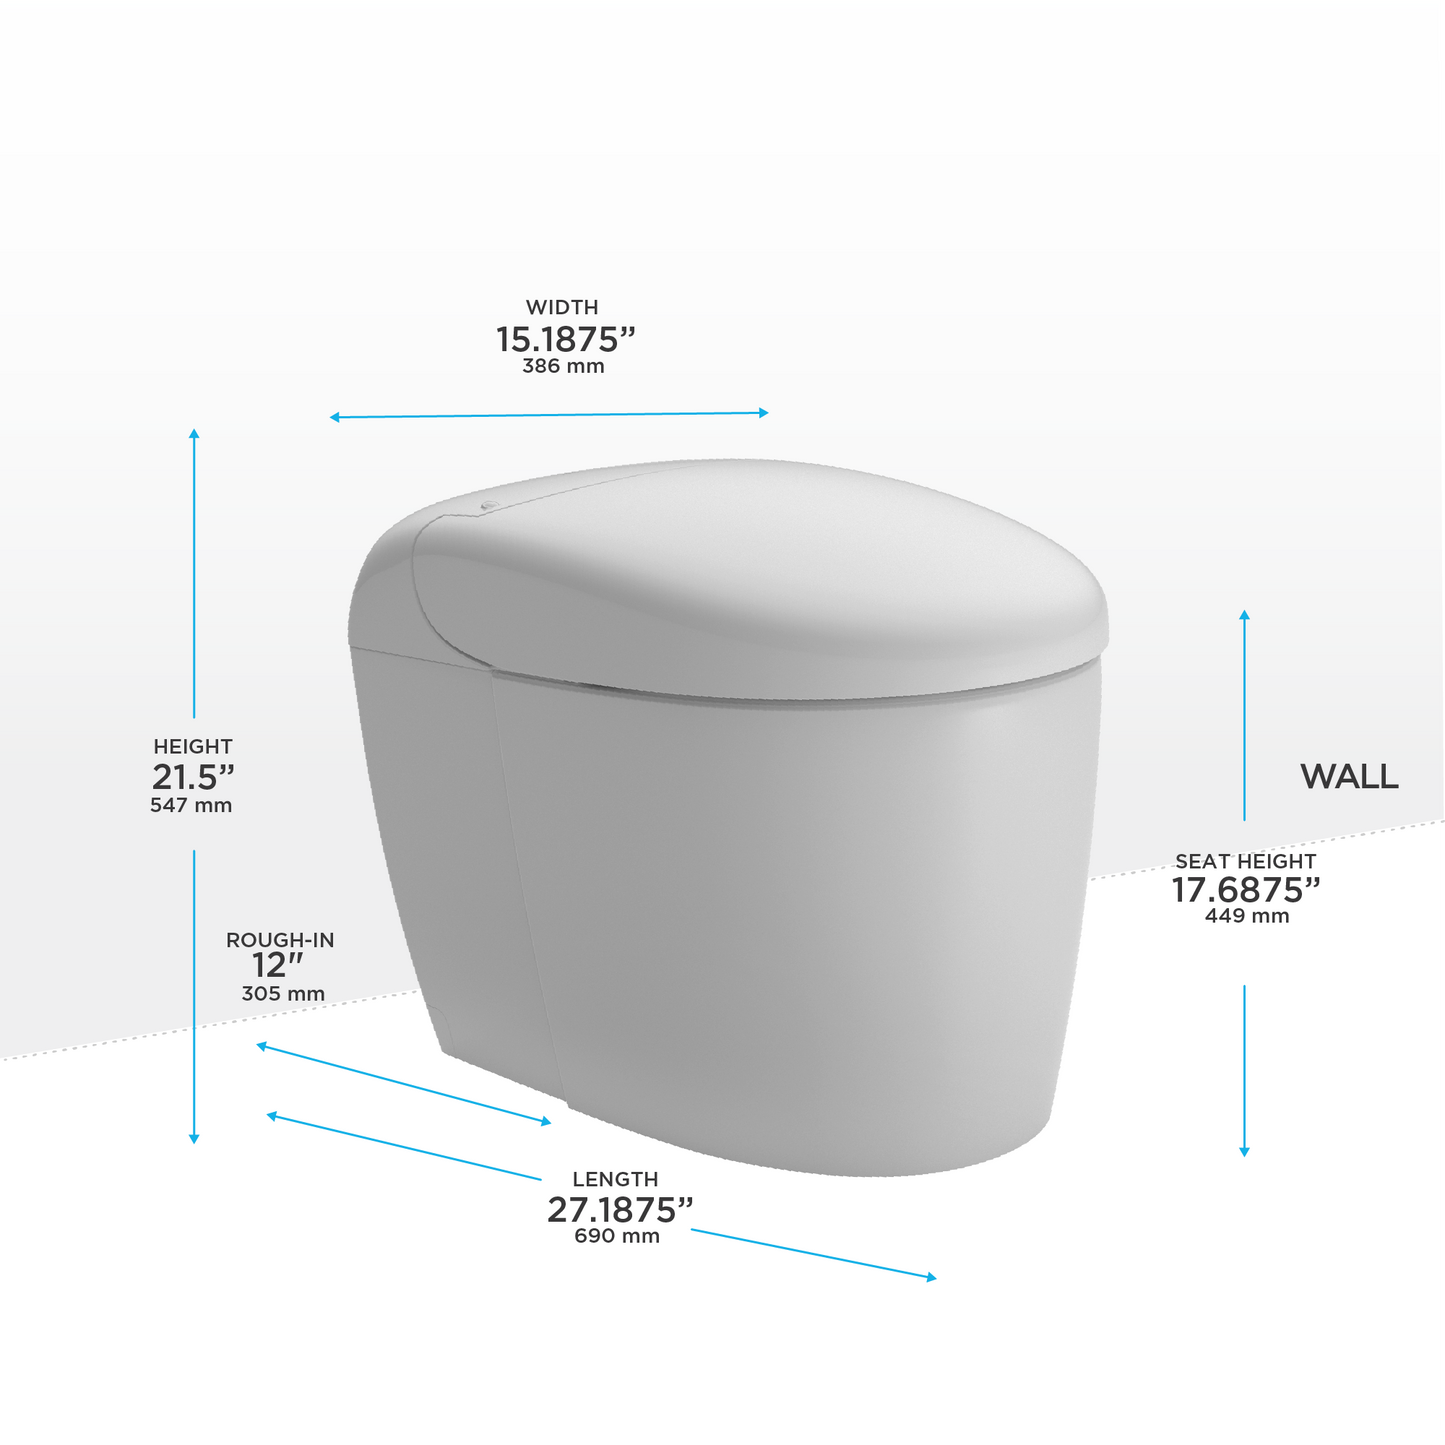 NEOREST® RS Dual Flush 1.0 or 0.8 GPF Toilet with Intergeated Bidet Seat and EWATER+, Cotton White - MS8341CUMFG#01